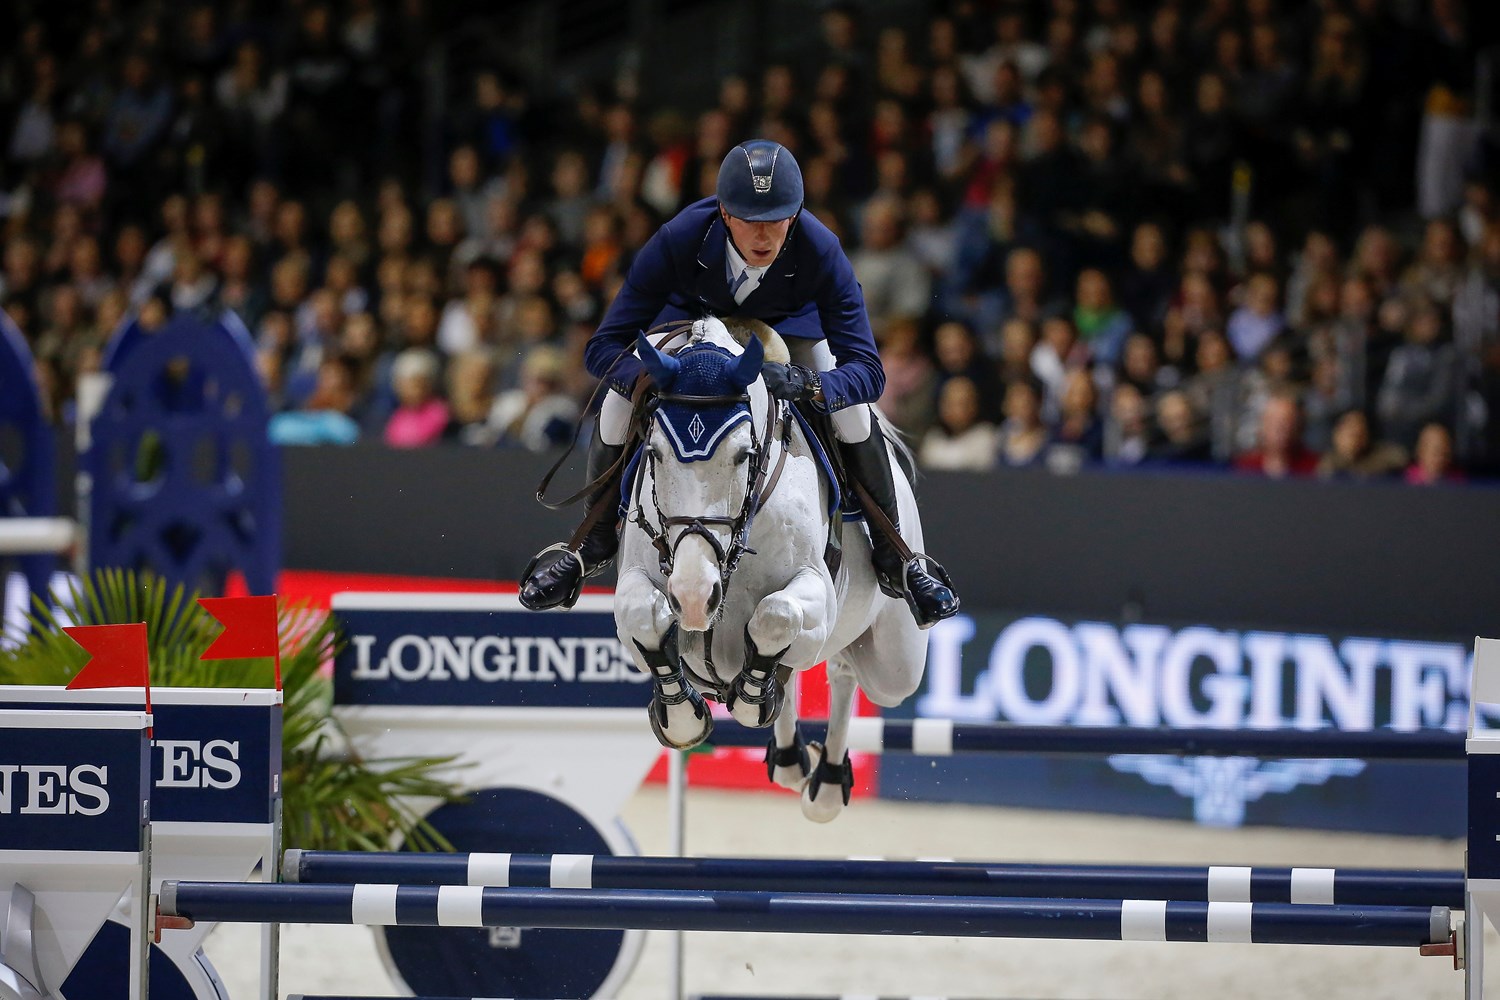 World’s Top Show Jumpers Will Head to World Cup in Las Vegas